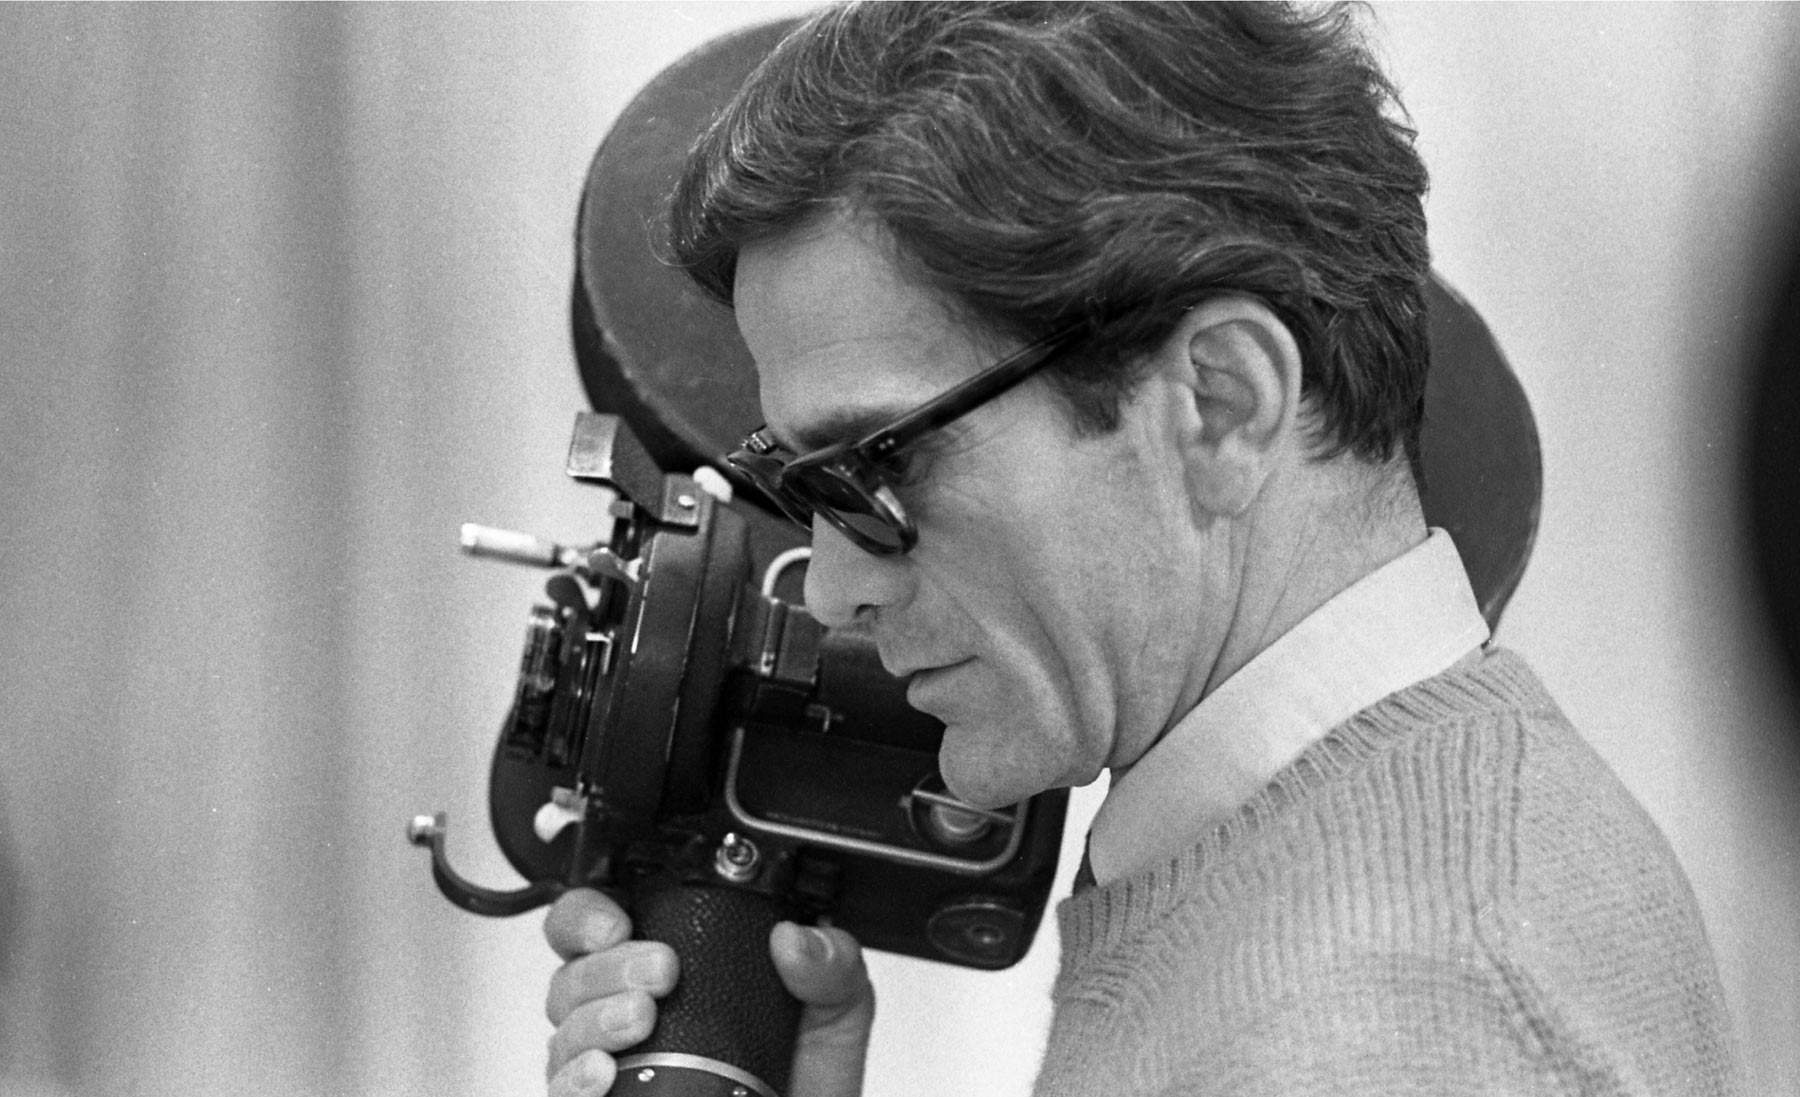 Bologna dedicates an exhibition to Pier Paolo Pasolini on the centenary of his birth